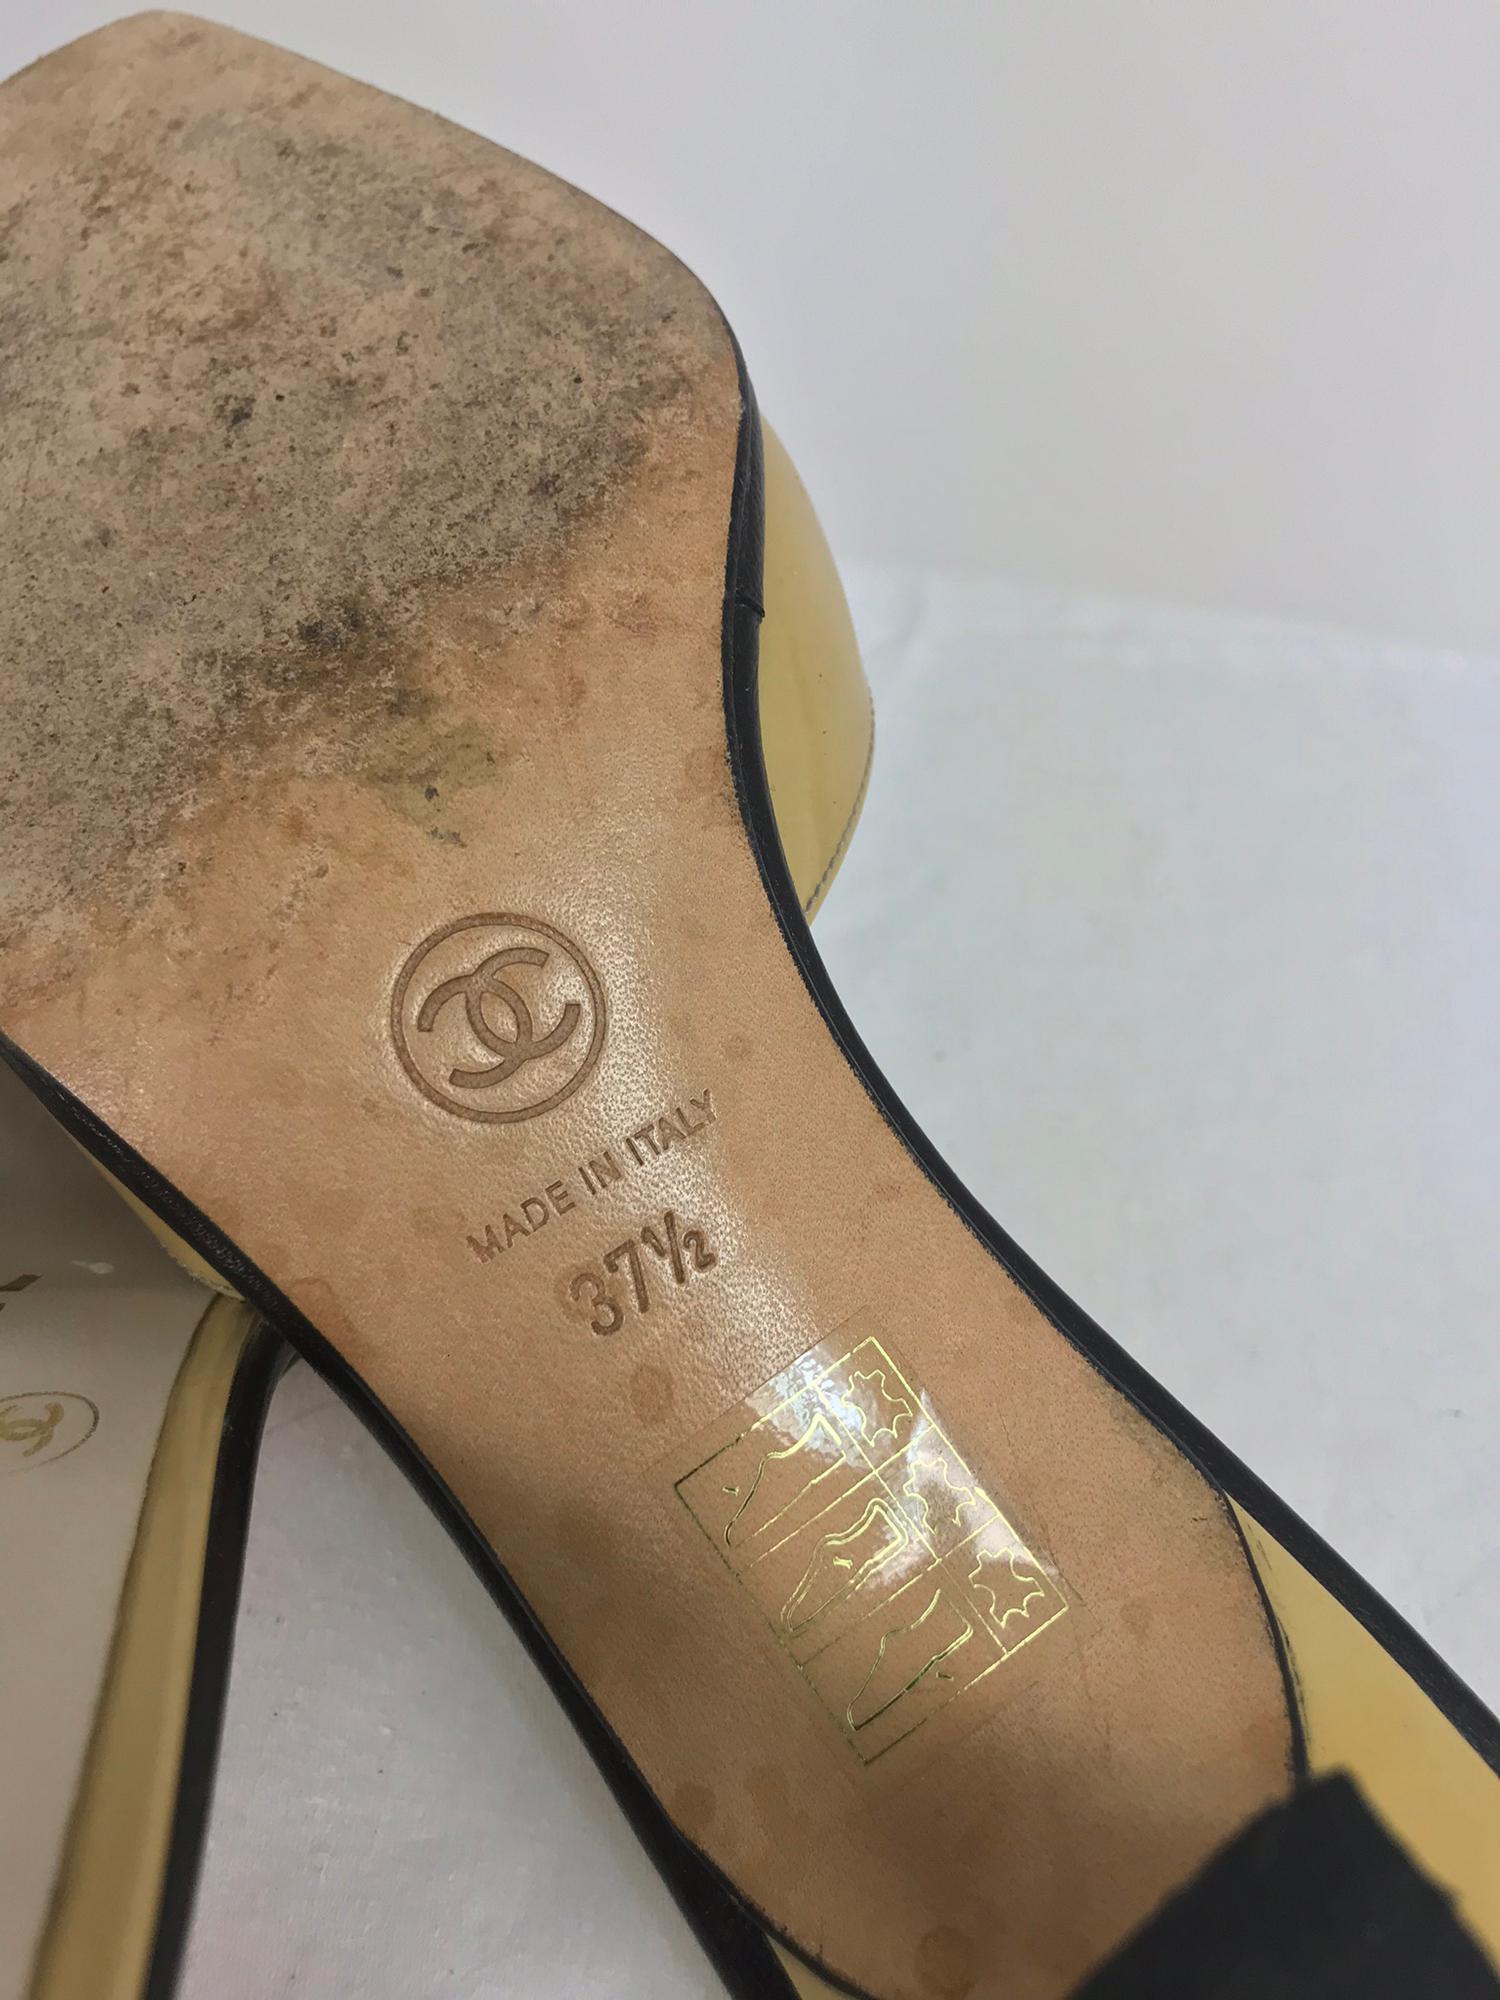 Chanel tan and black patent Louis heel leather mules with box 37 1/2 M ...